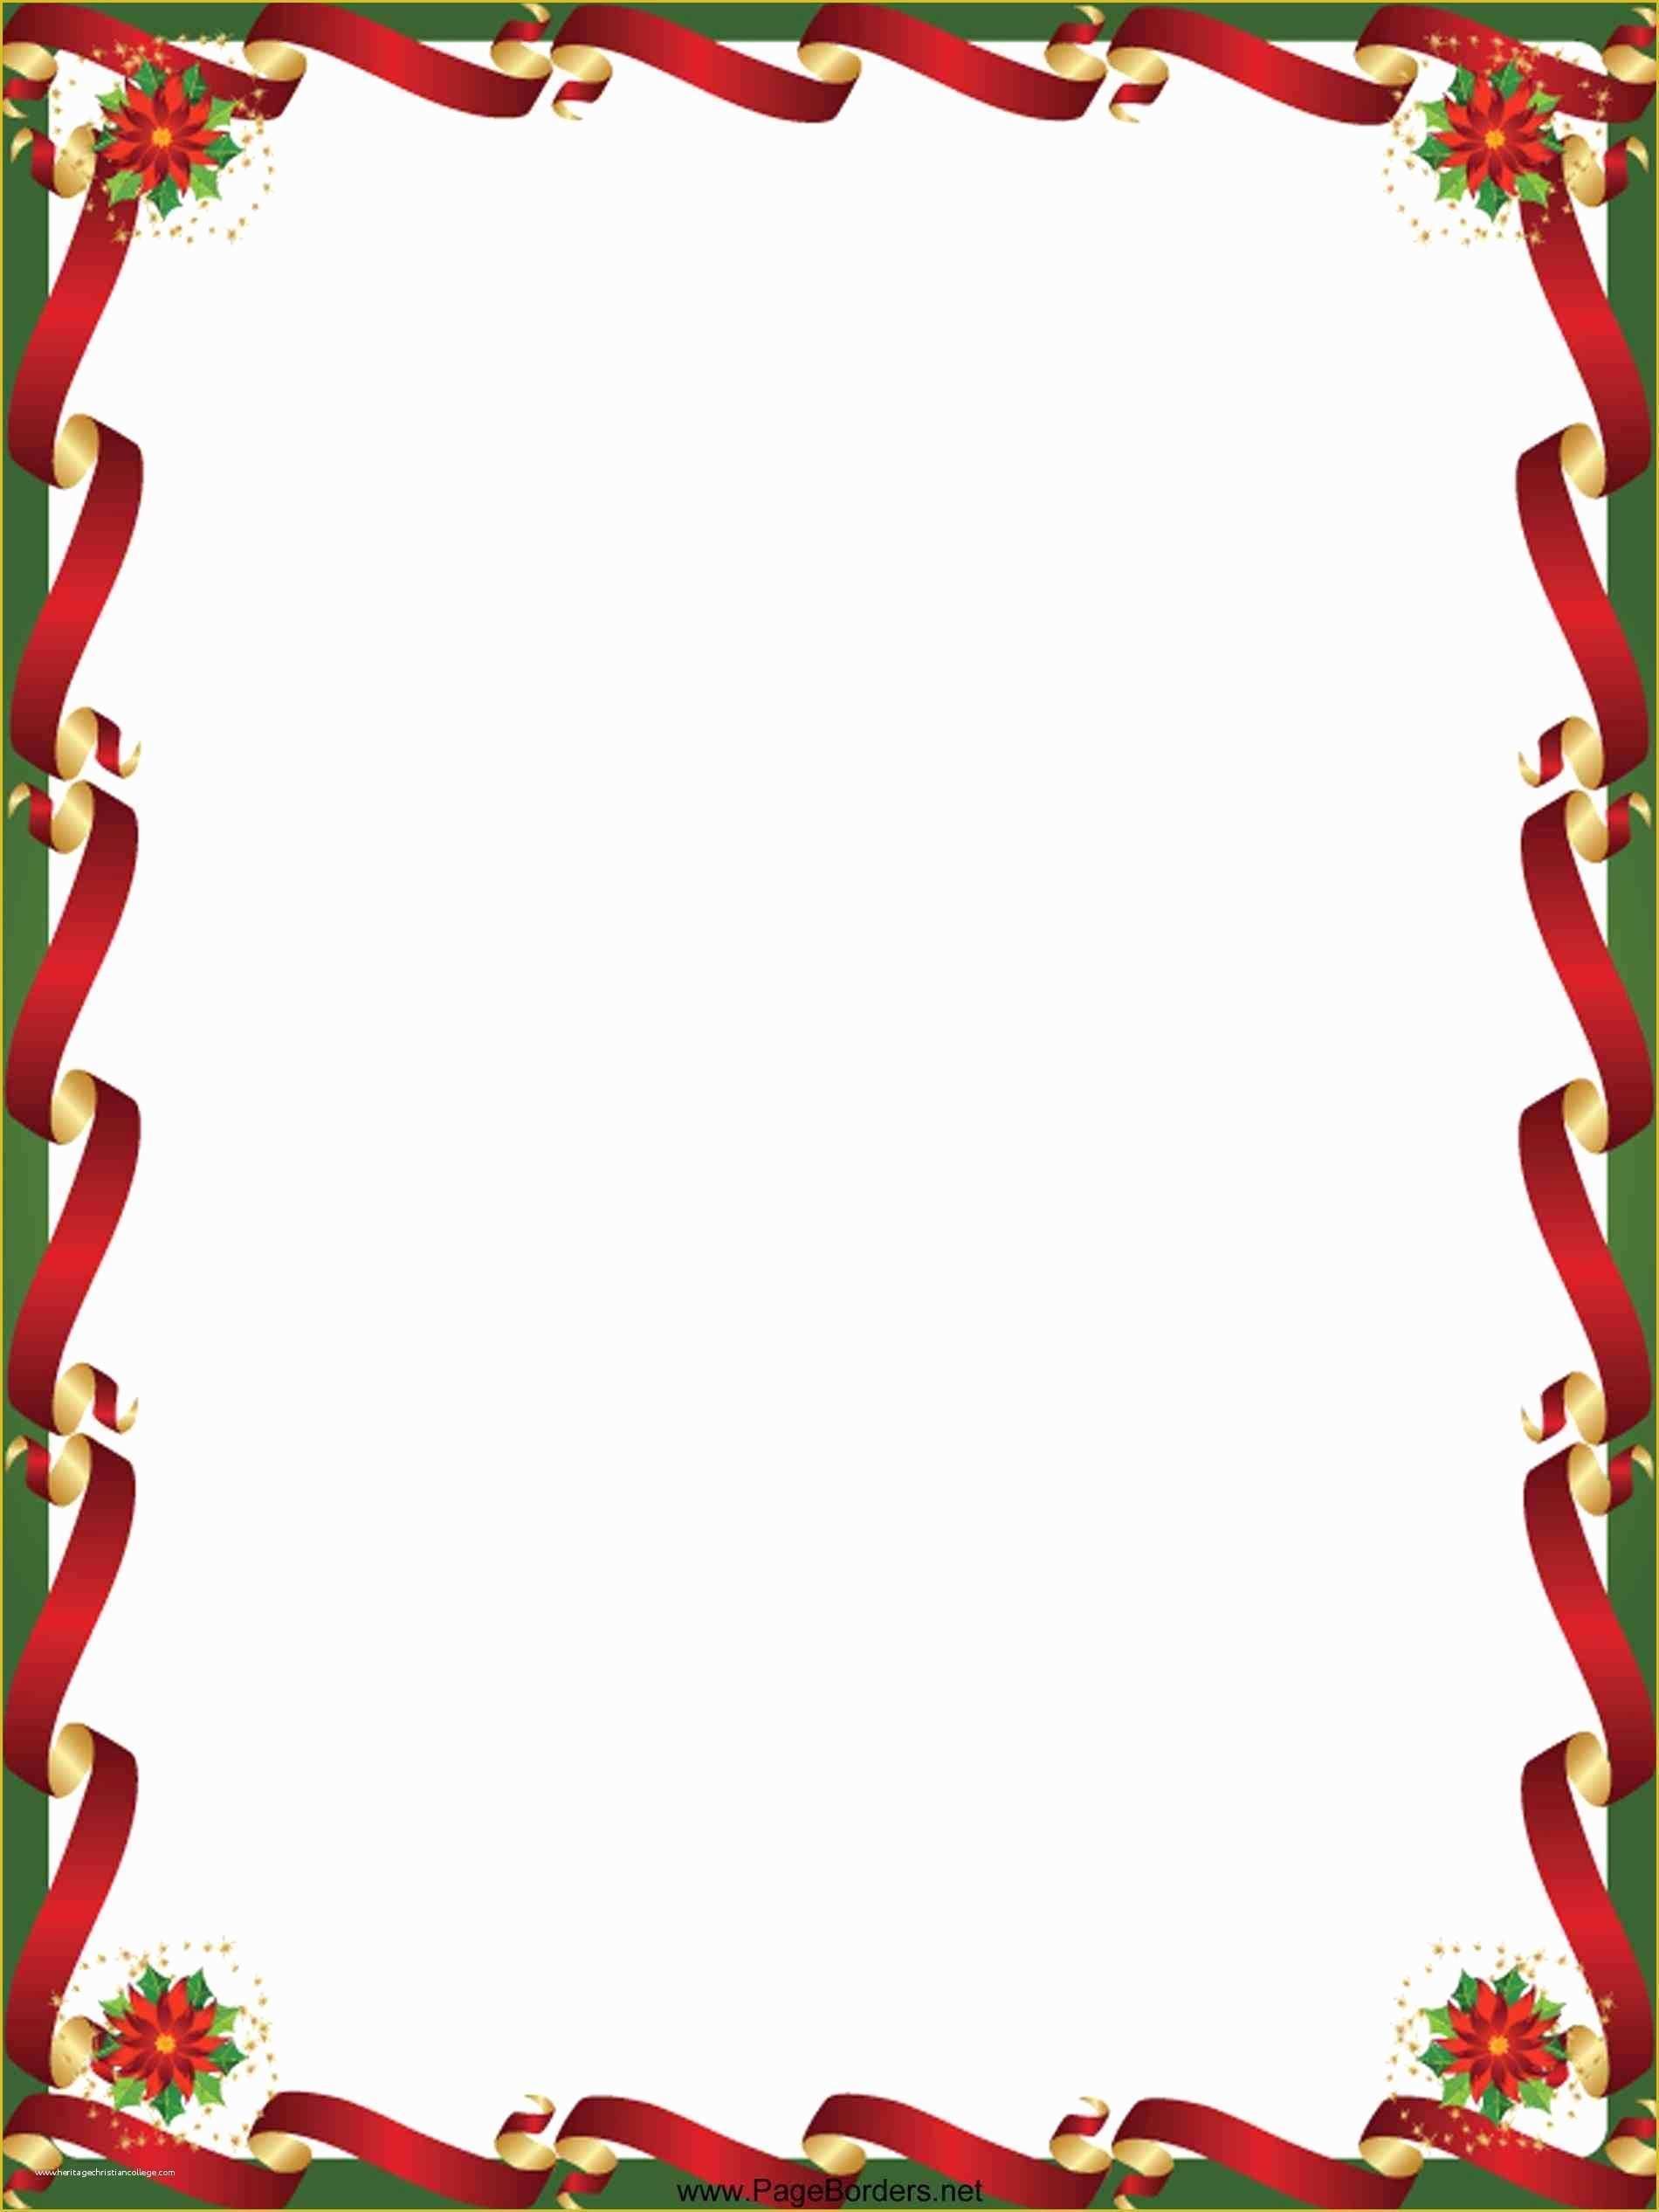 Christmas Border Templates Free Download Of This Free Christmas Border Templates Happy New